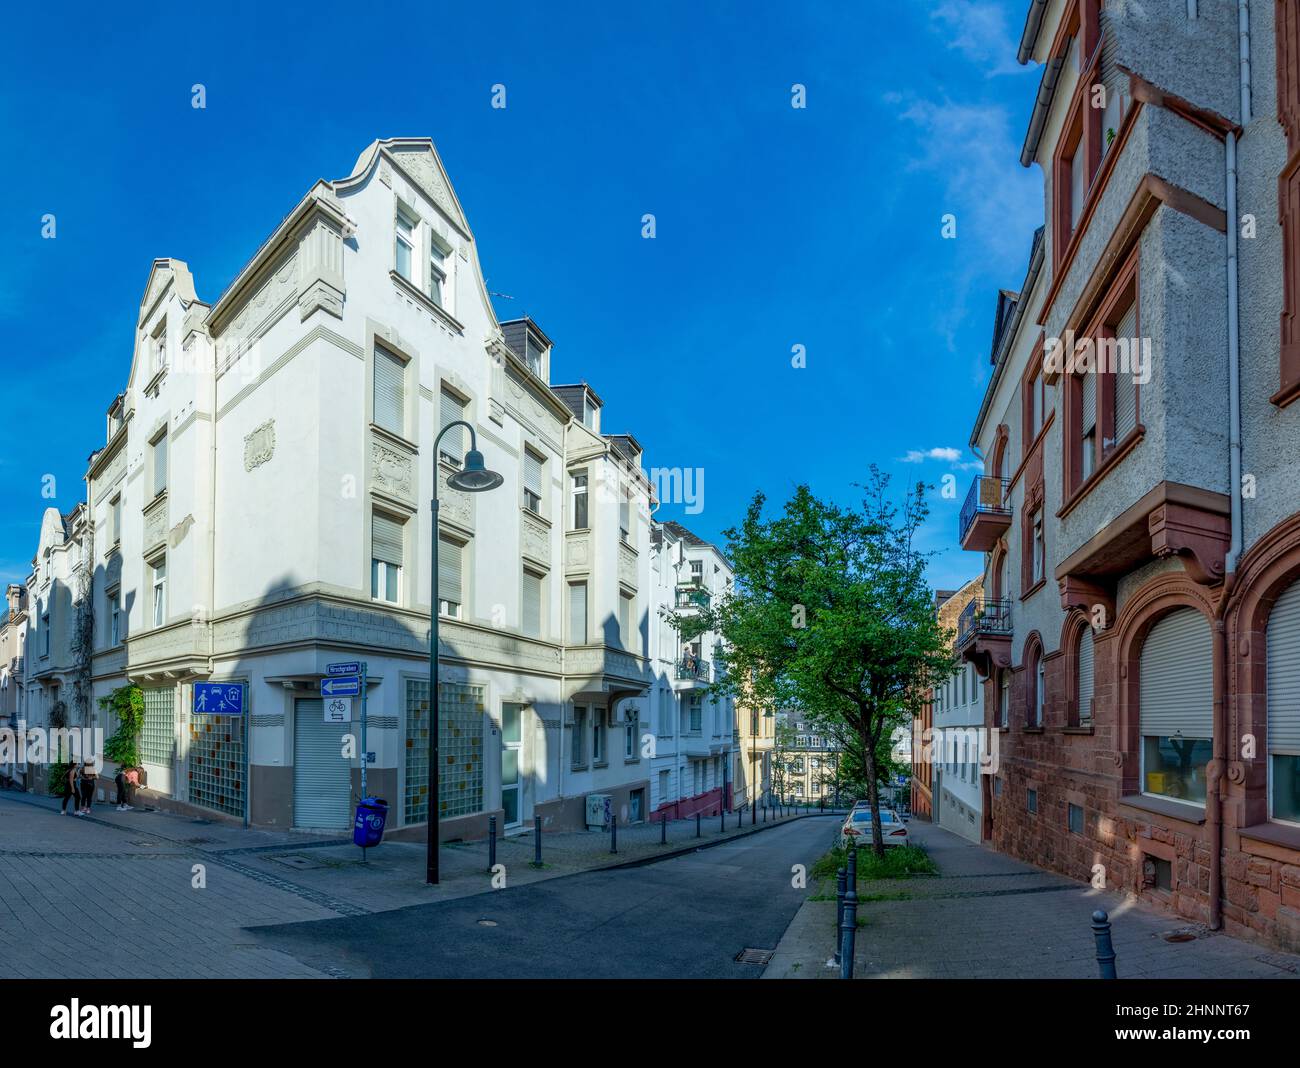 streetview of Wiesbaden old town with typical brick buildings of the 19th century Stock Photo